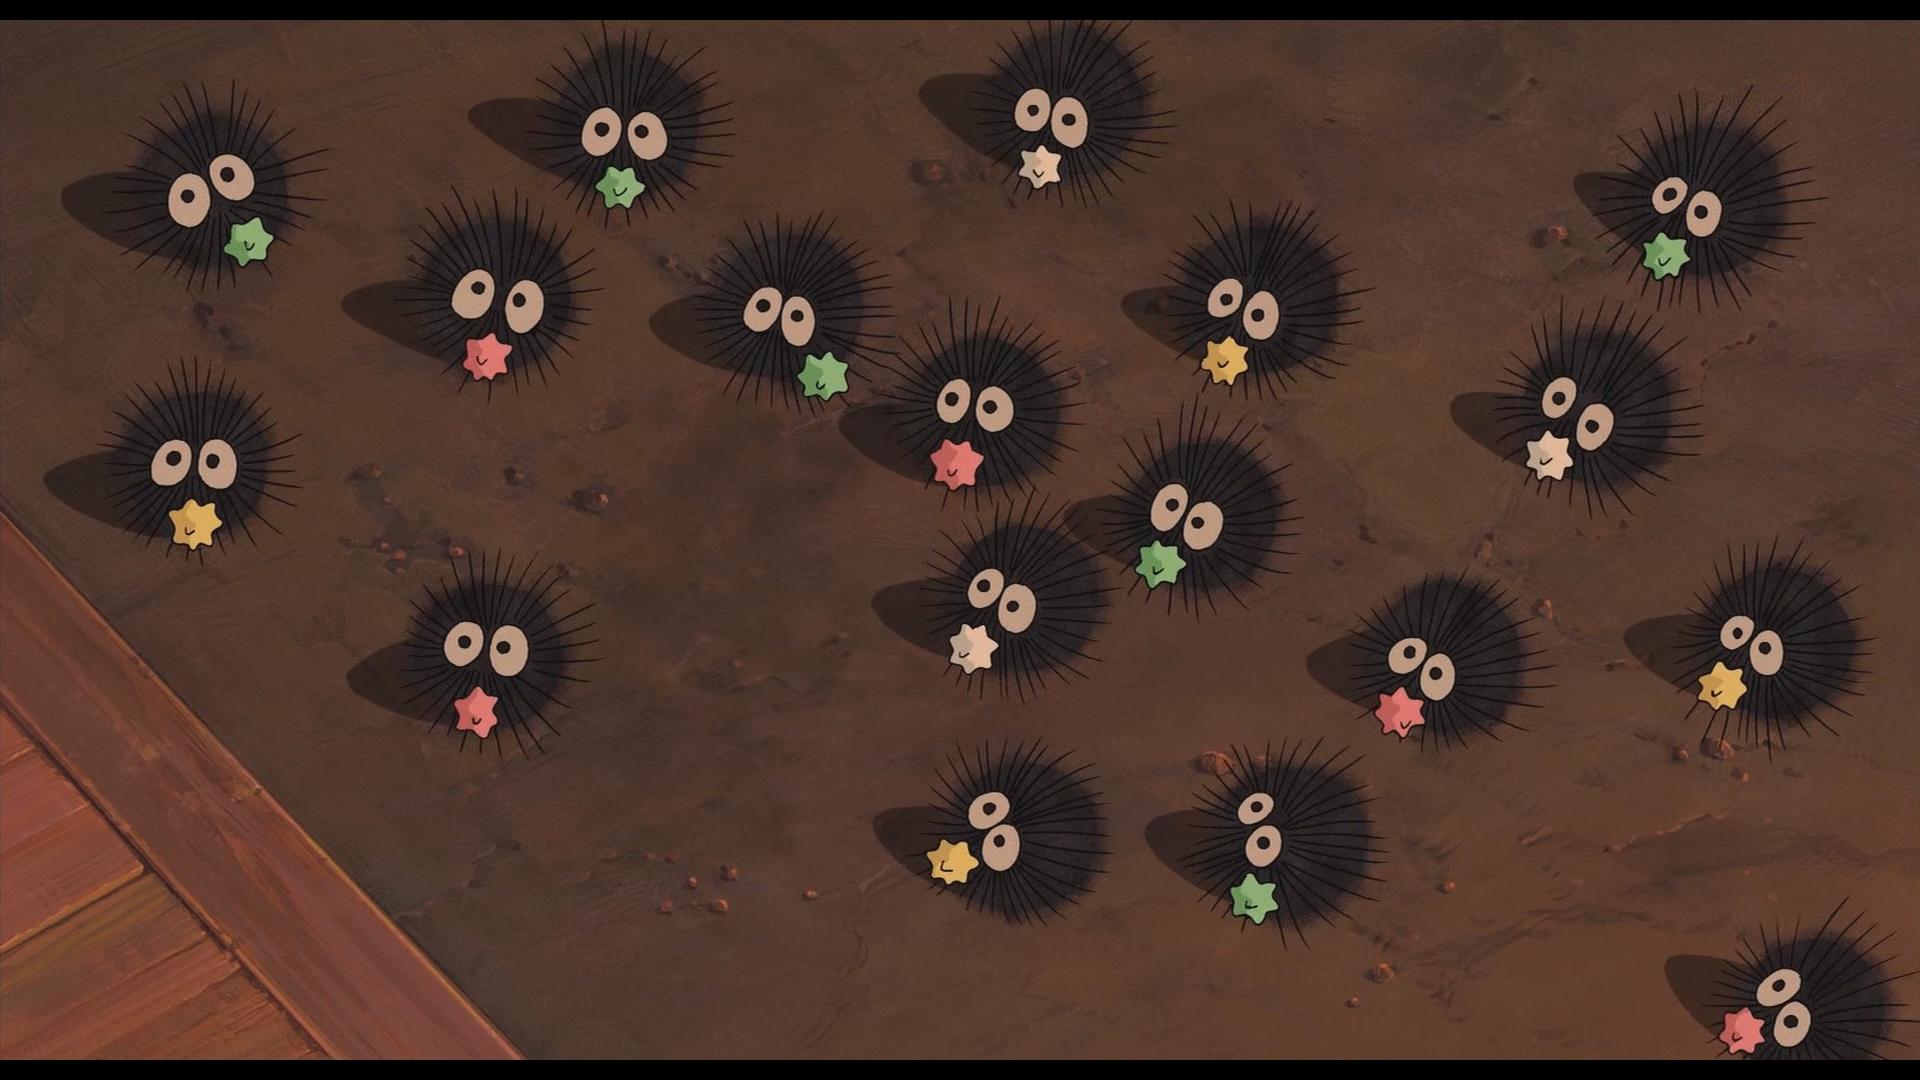 Anyone have a wallpaper sized image of the soot sprites with stars?